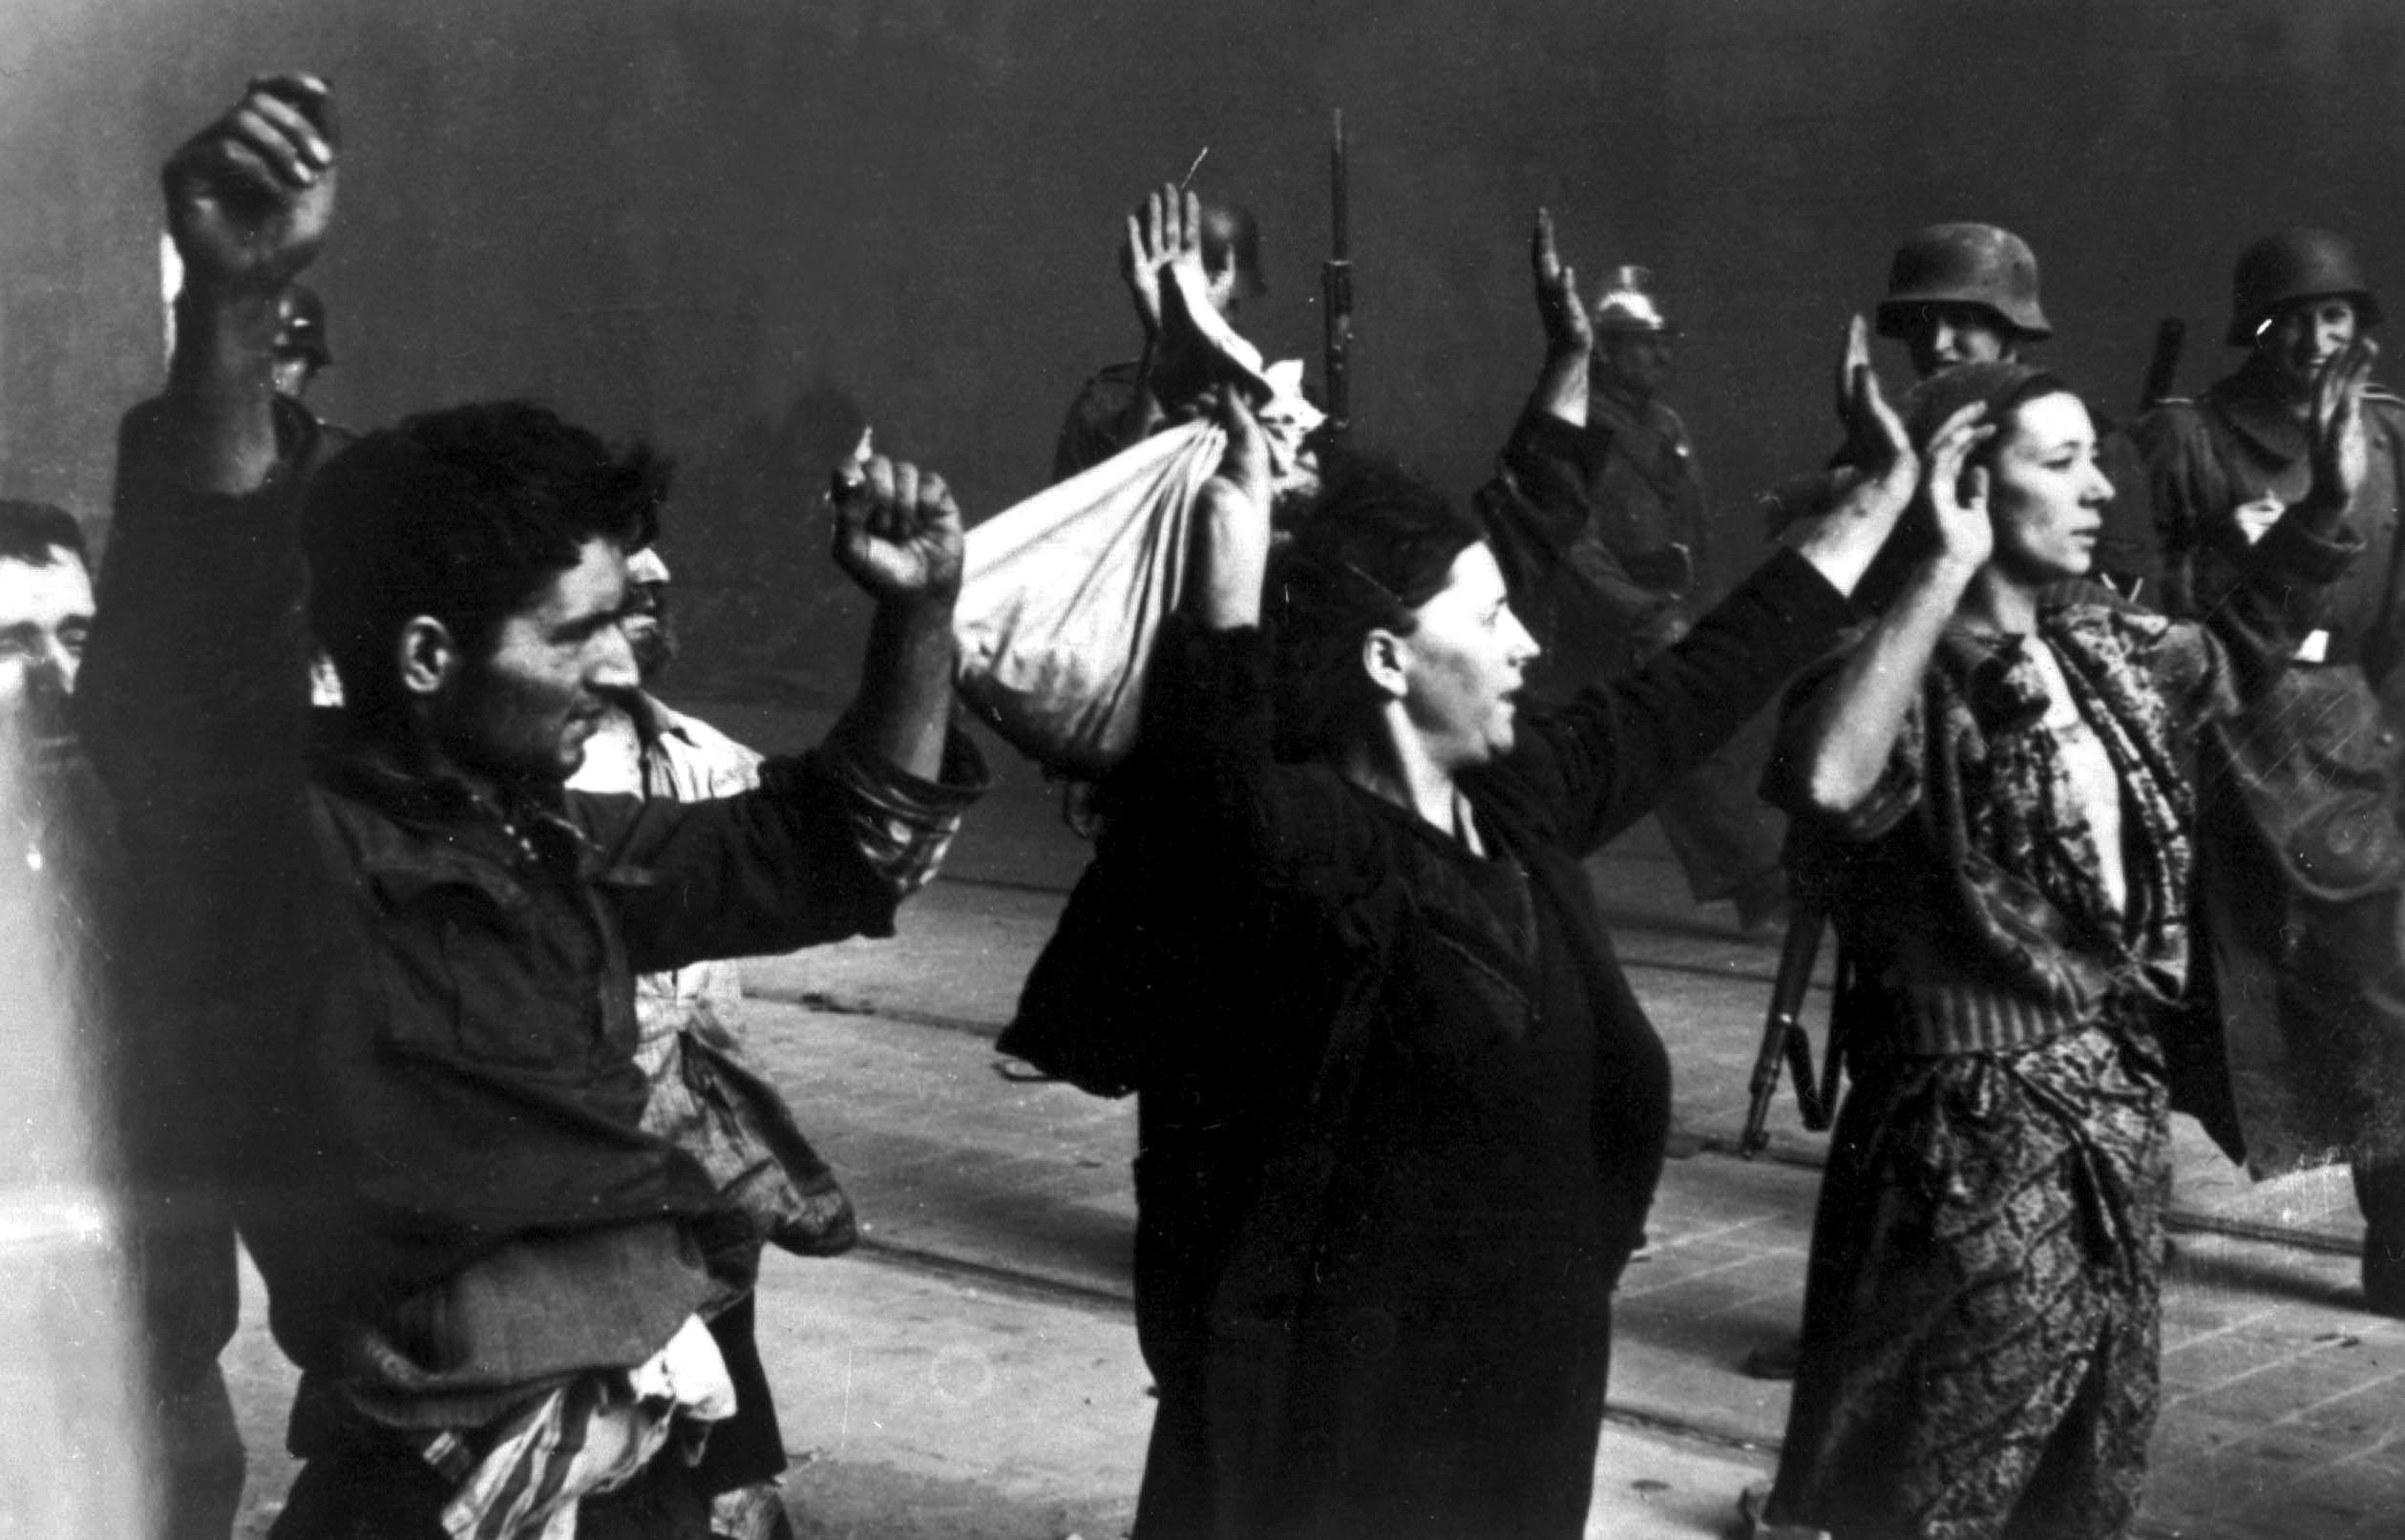 Honorable surrender. Rabbi Menahem Ziemba’s outlook evidently triumphed in the end; for many Jews, the Warsaw ghetto uprising represents a spark of Jewish heroism in the dark humiliation of the Holocaust. Jewish women captured at the end of the revolt